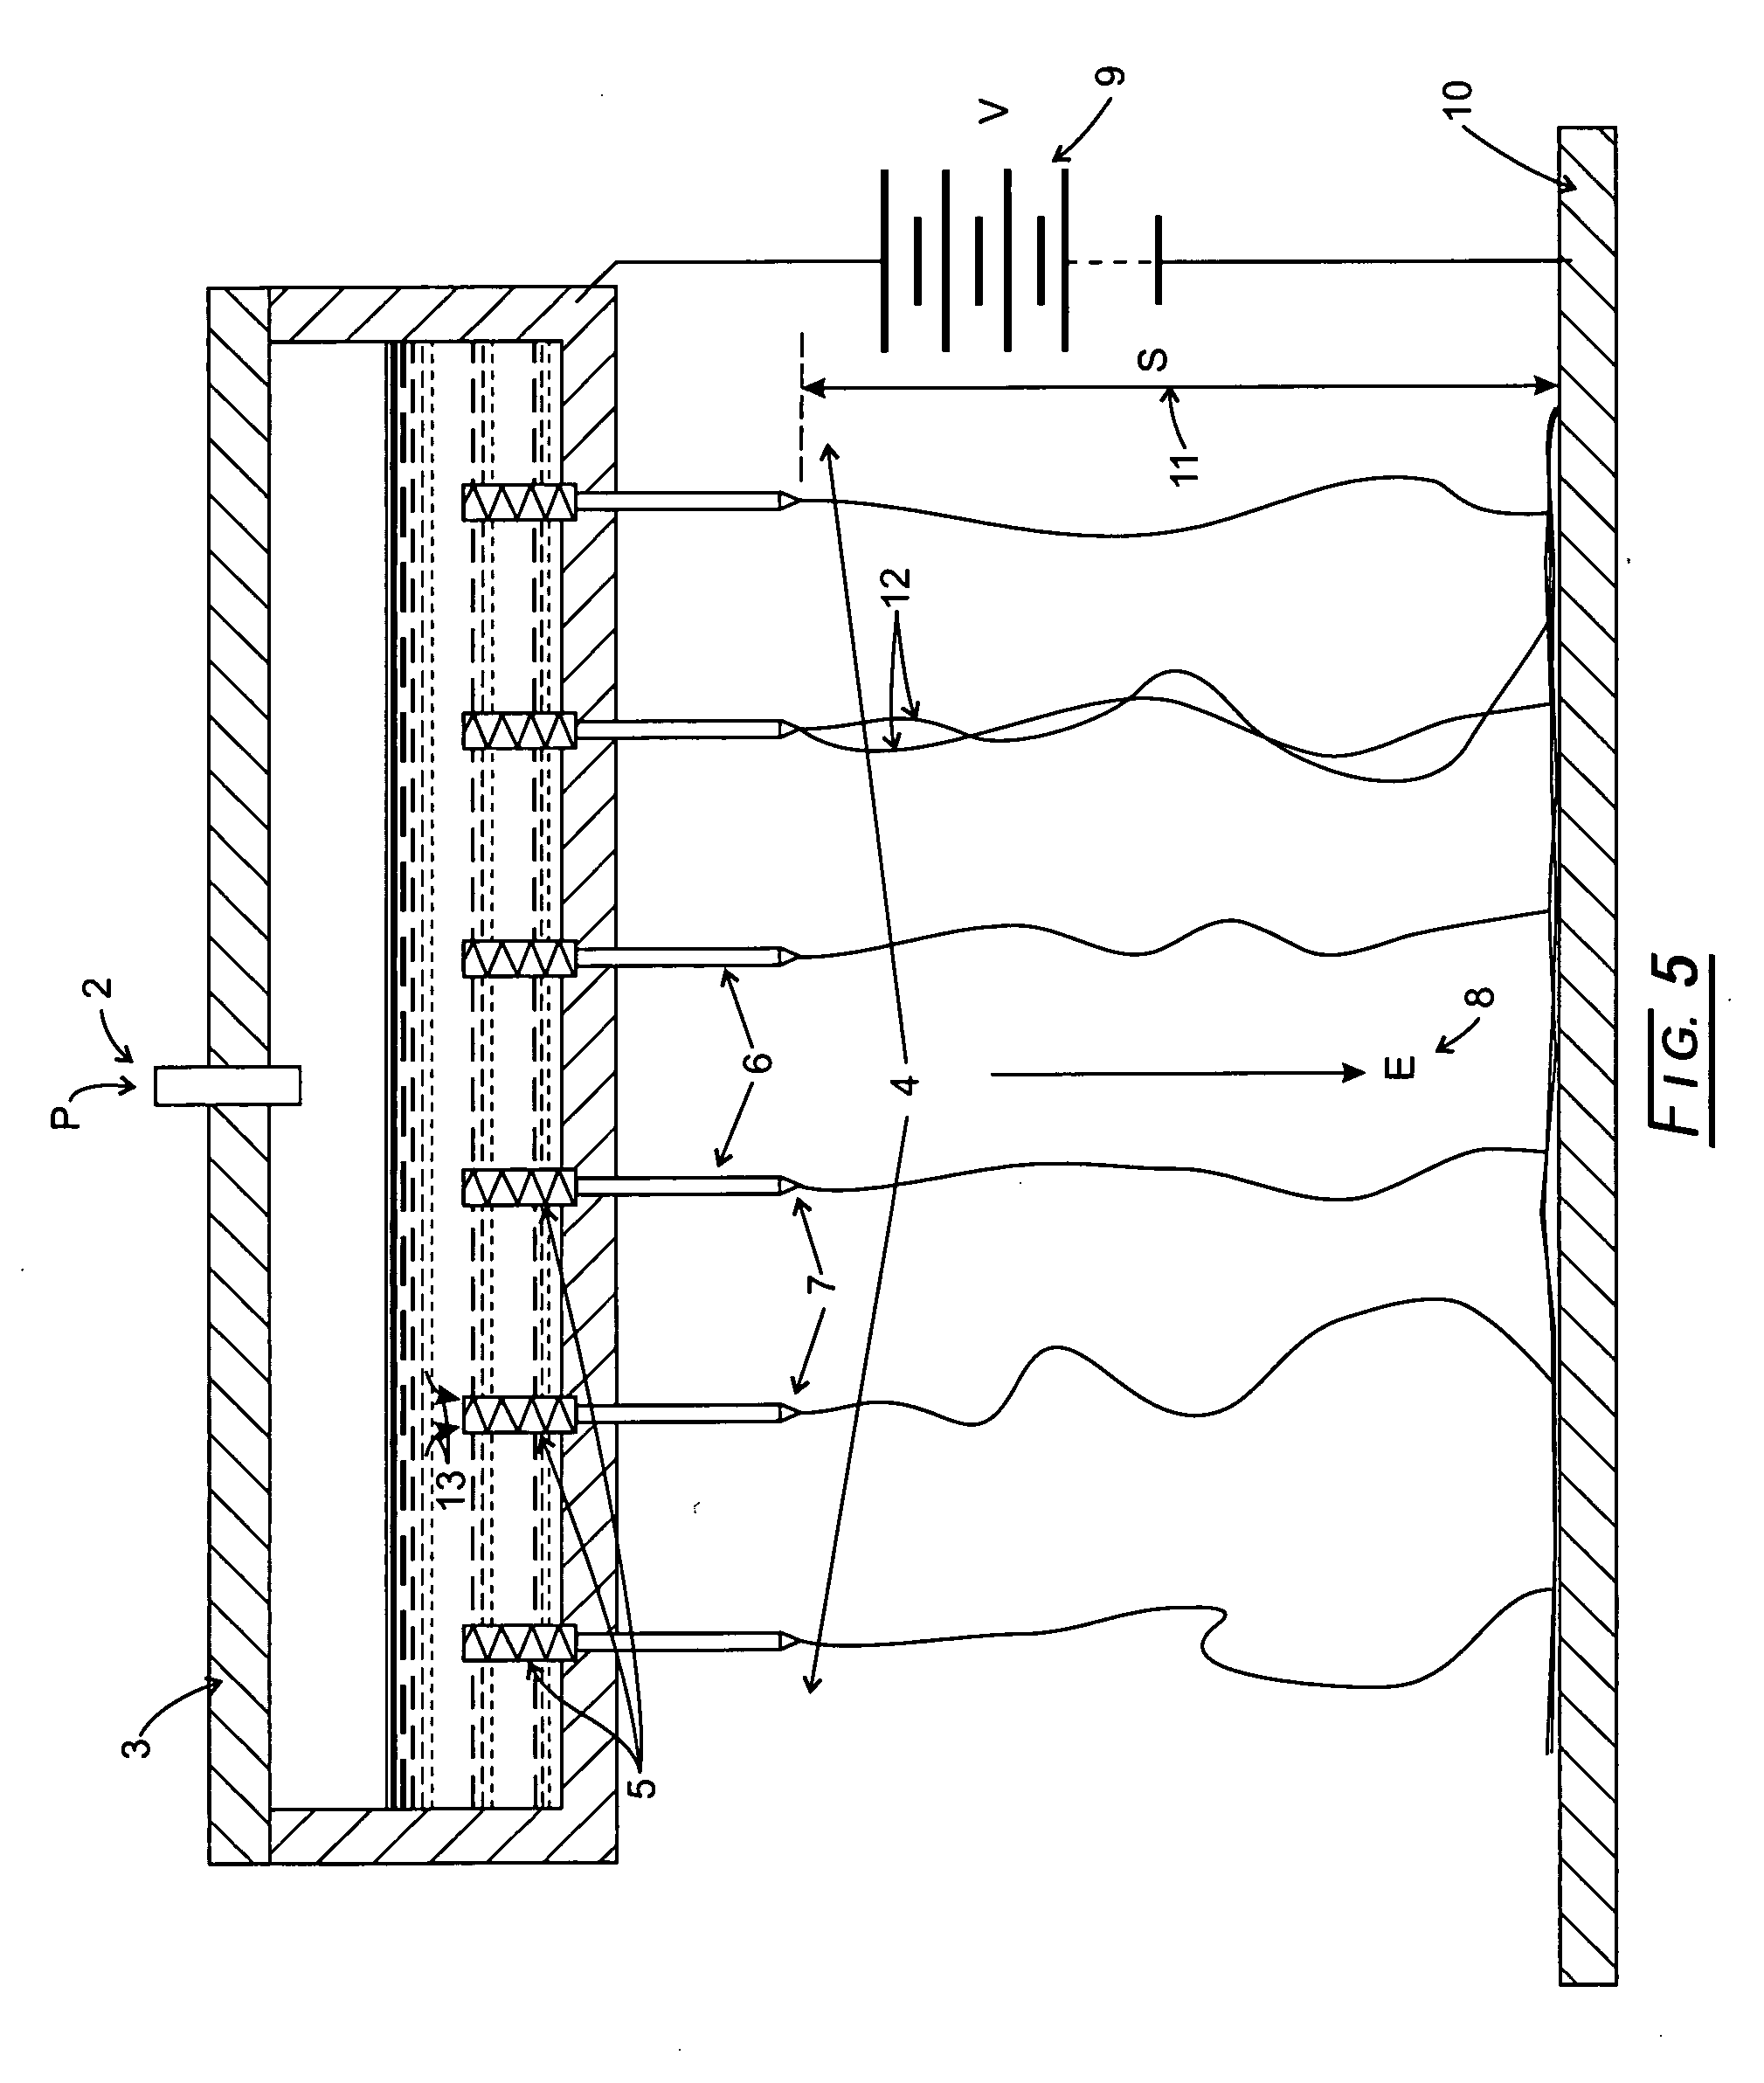 Electrospraying/electrospinning array utilizing a replacement array of individual tip flow restriction